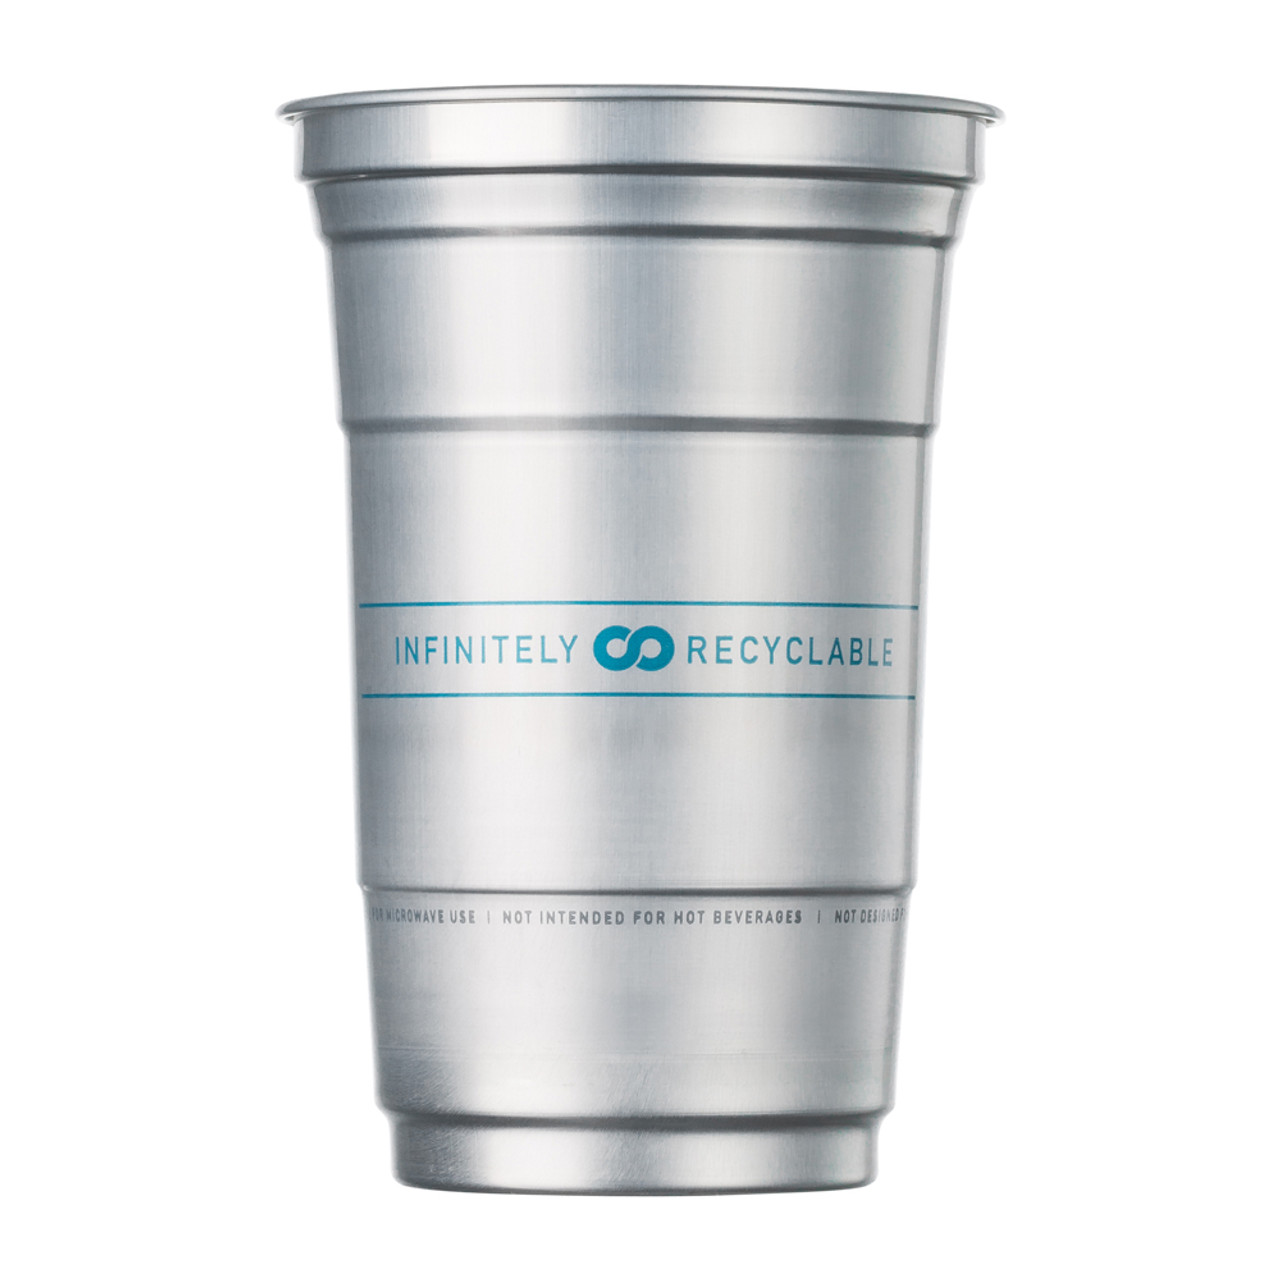 Earth Day is every day for the Ball Aluminum Cup, however today we  celebrate that there are ways to eliminate single-use plastics, with the…